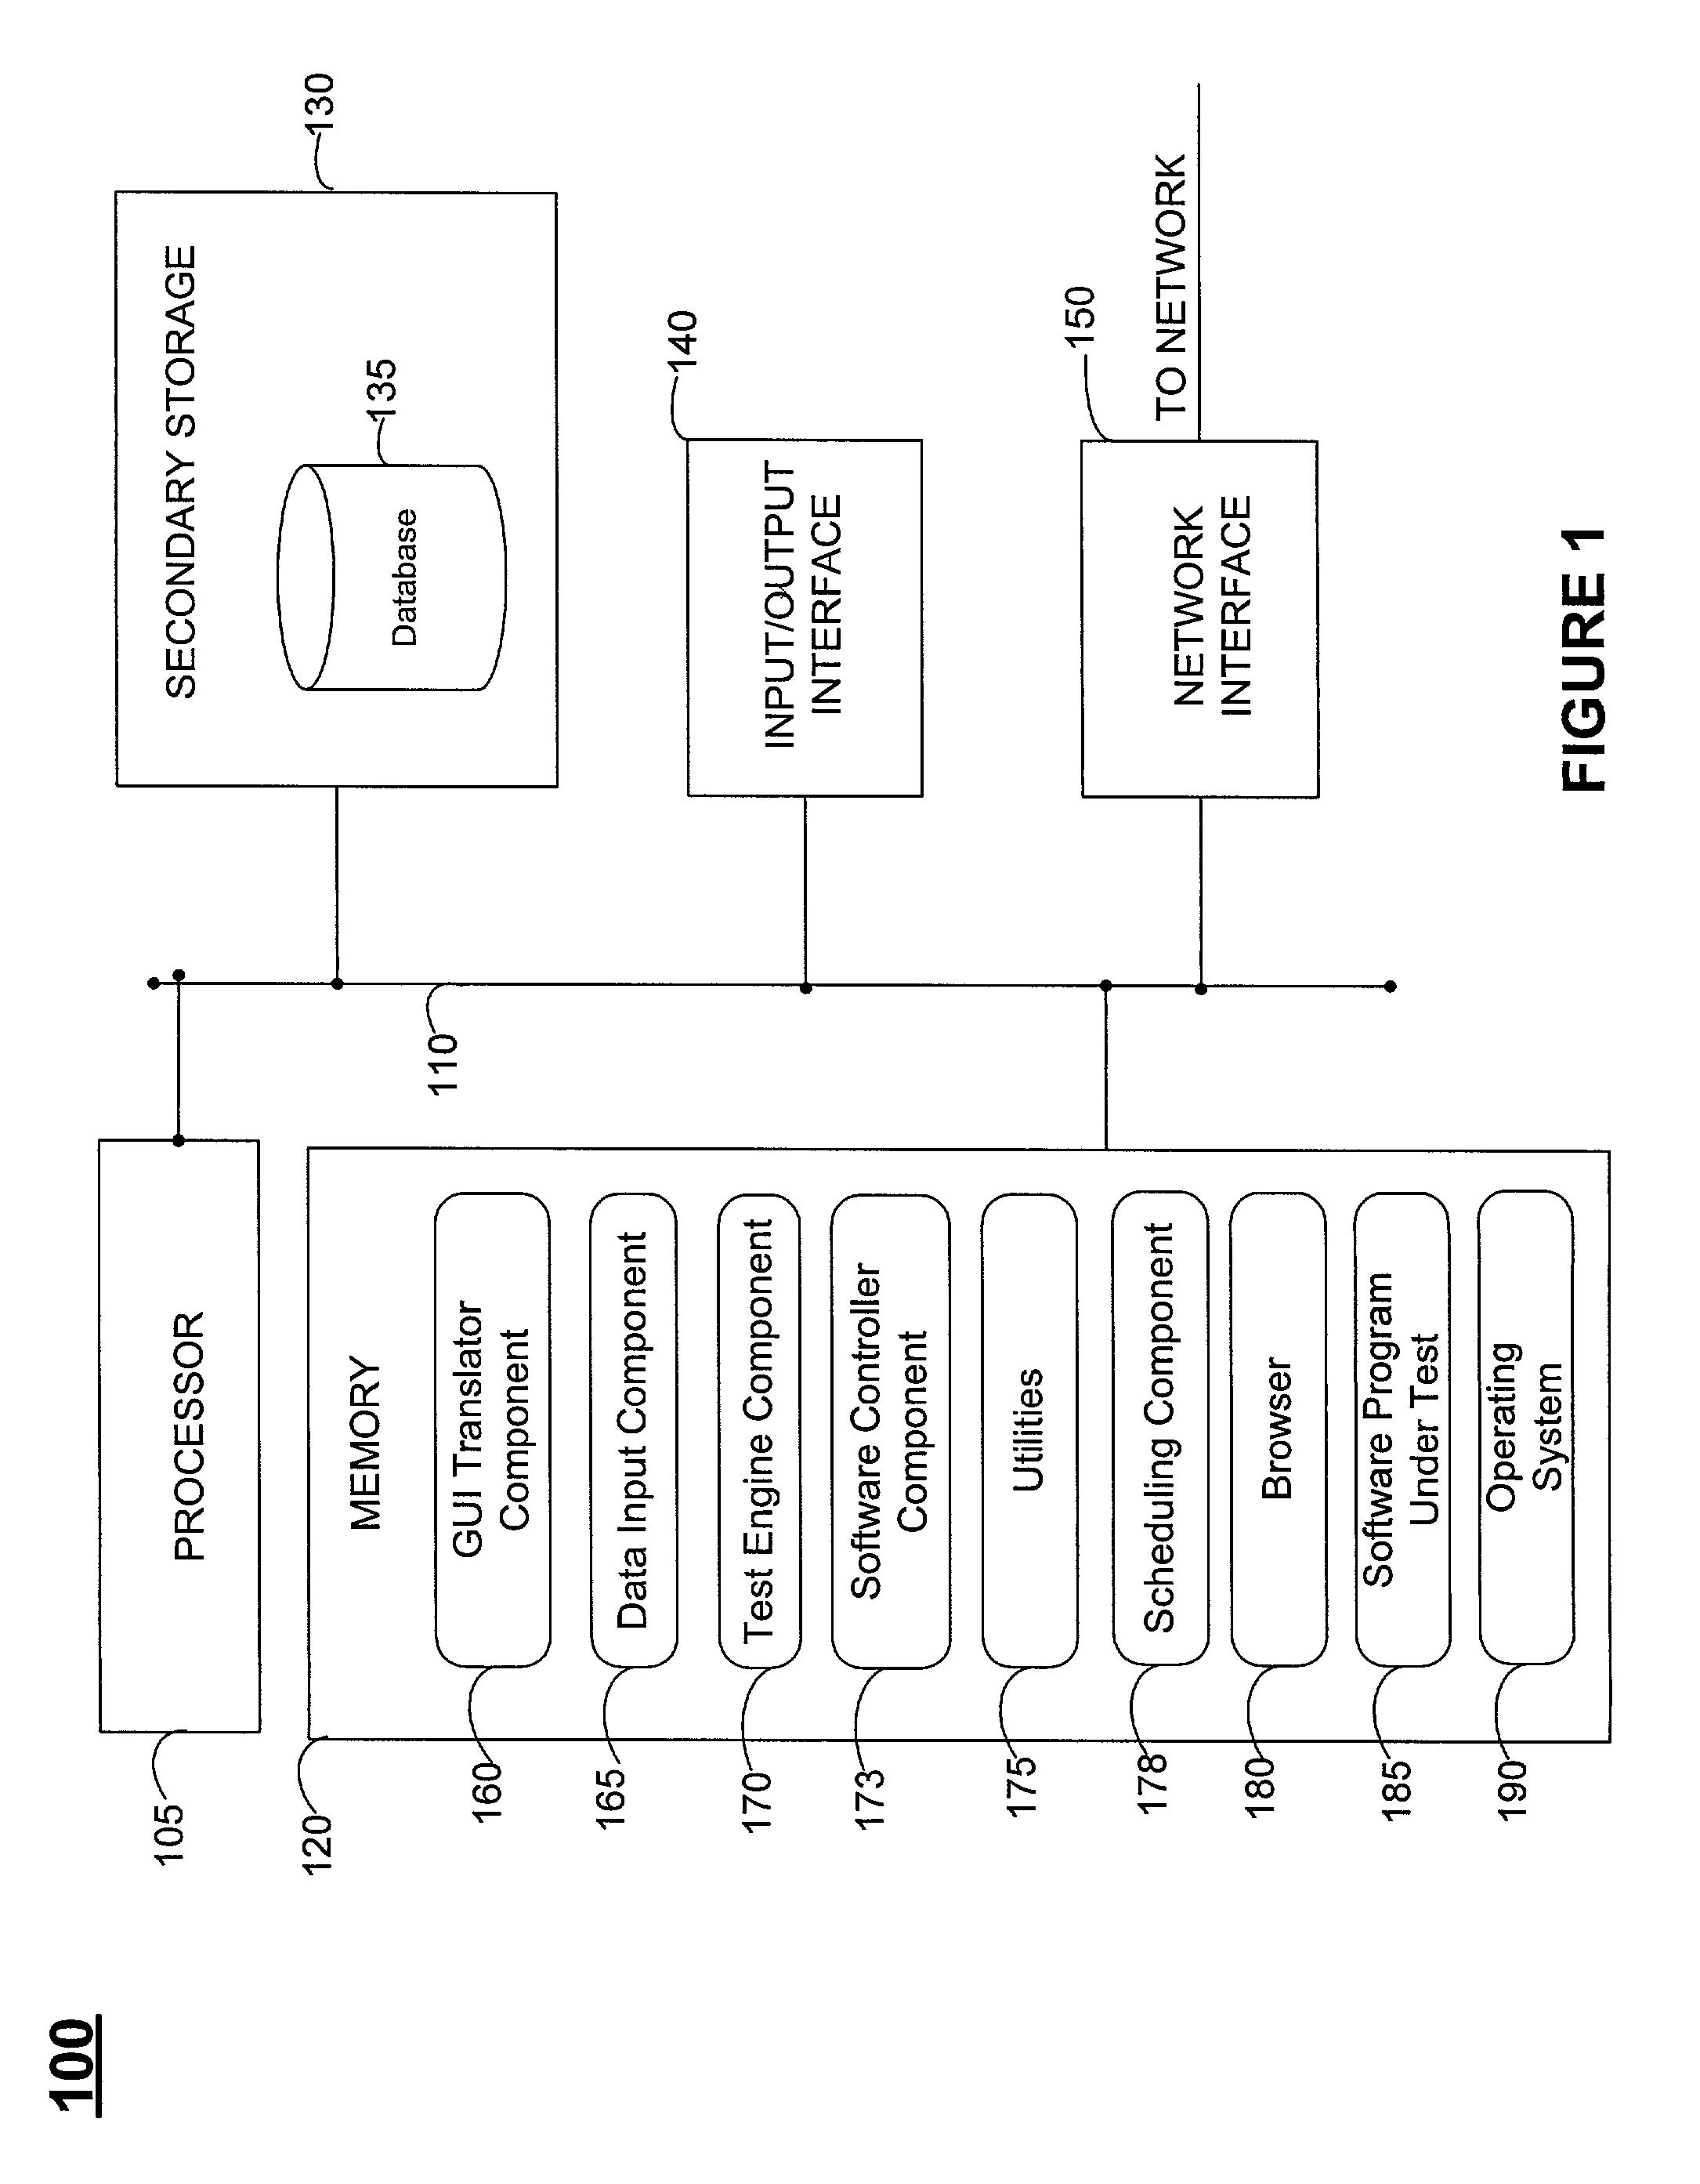 Systems and methods for table driven automation testing of software programs